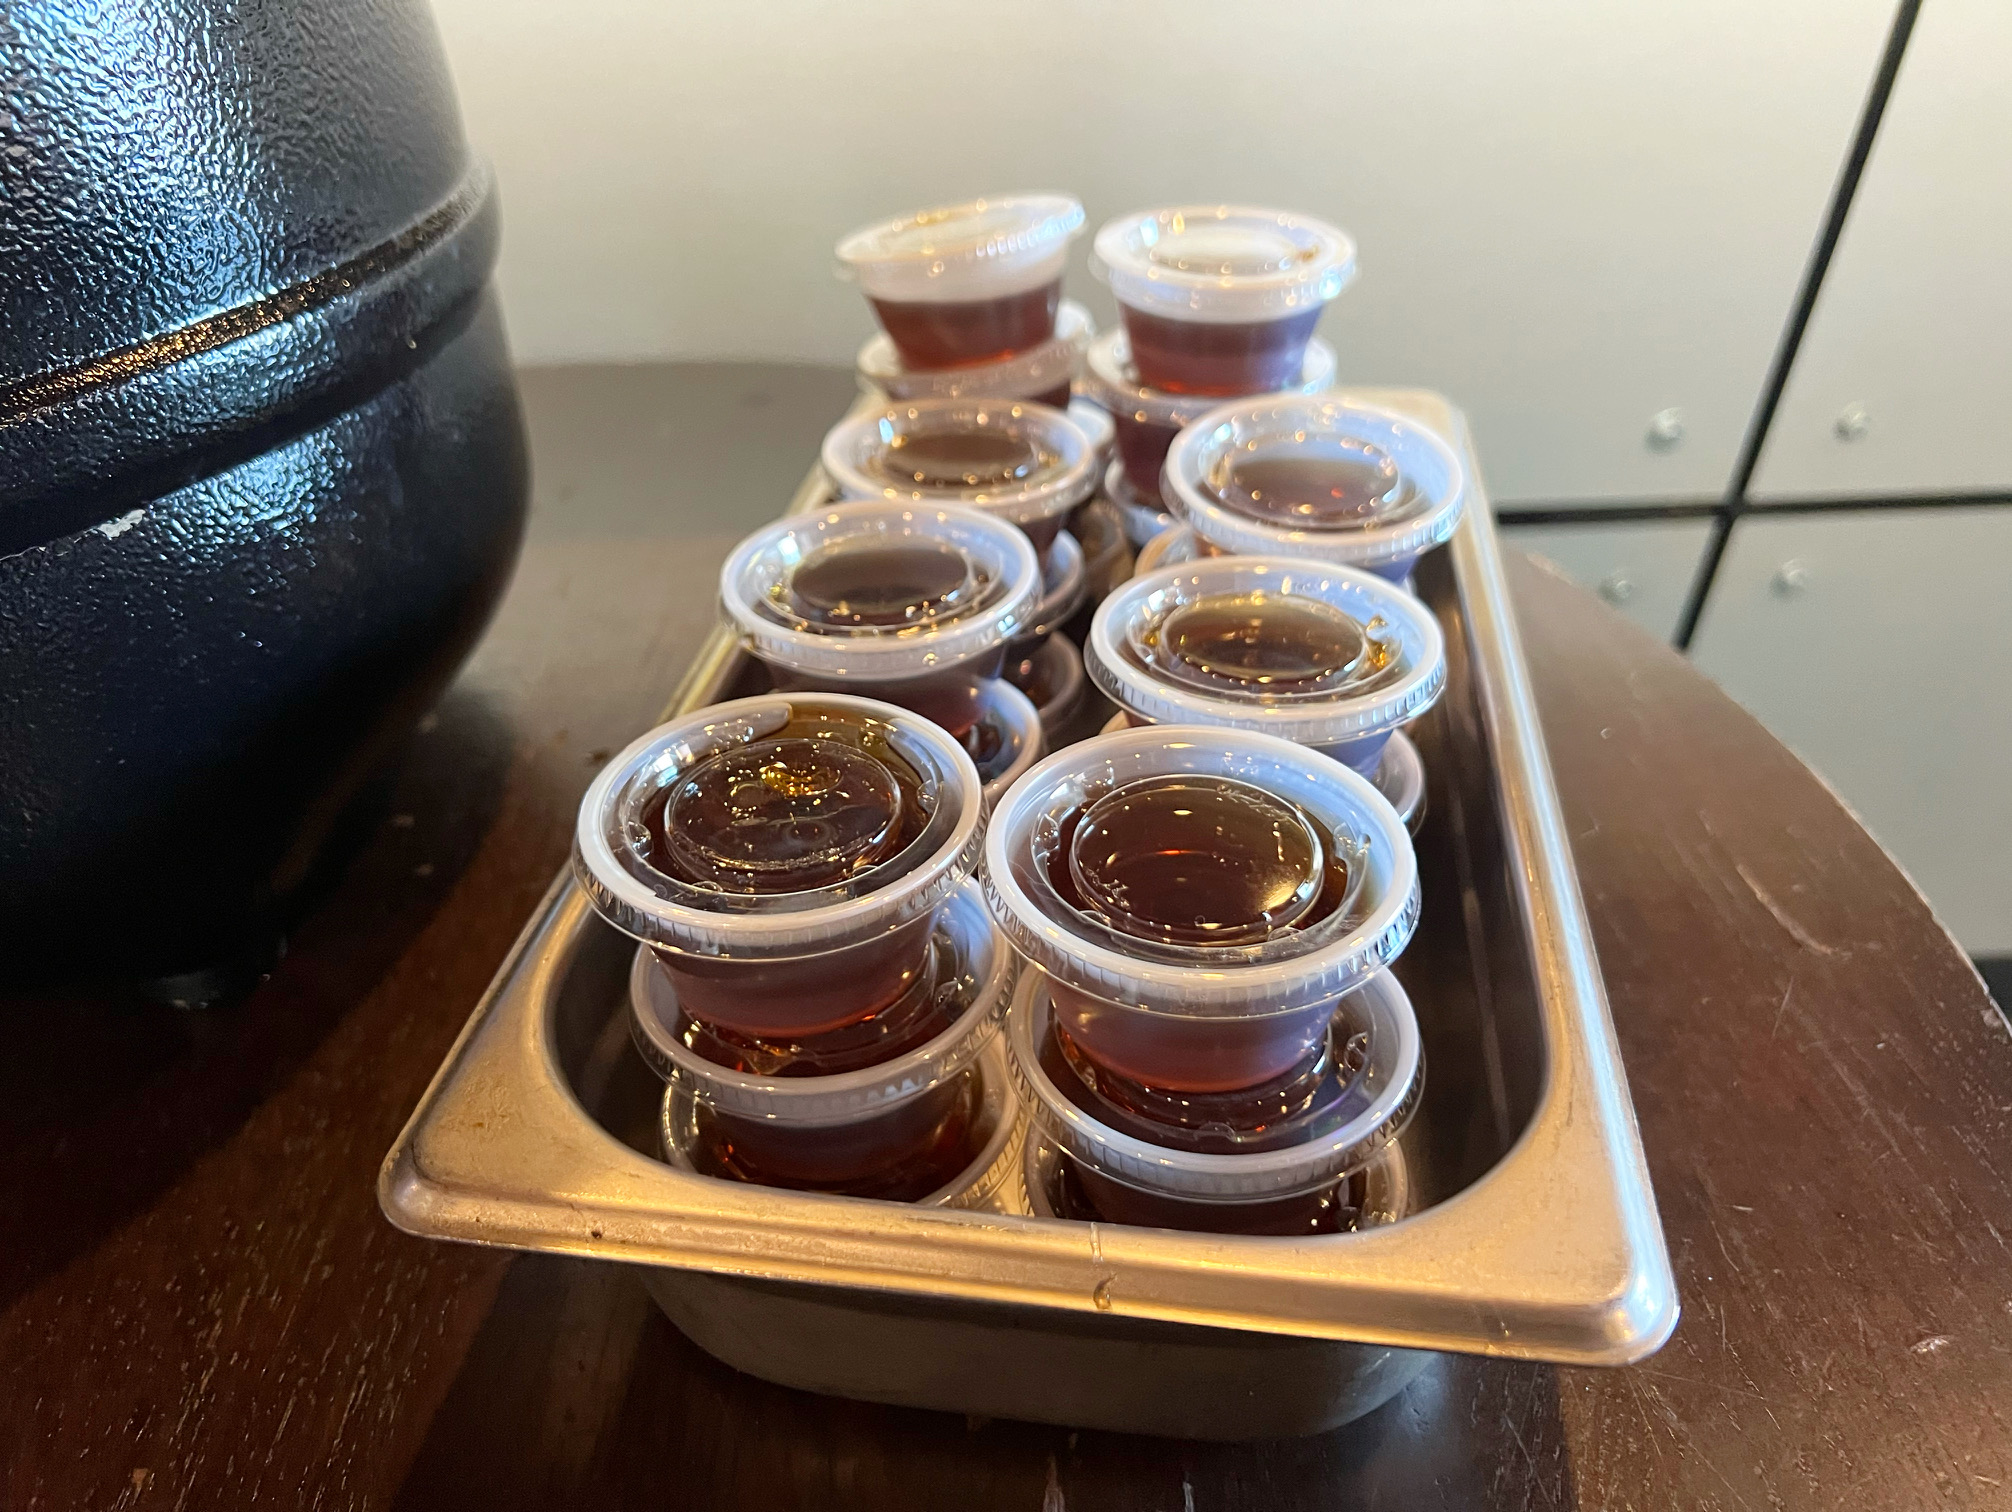 On a wooden table, there is a metal tray holding plastic individually sized cups of syrup. Photo by Alyssa Buckley.